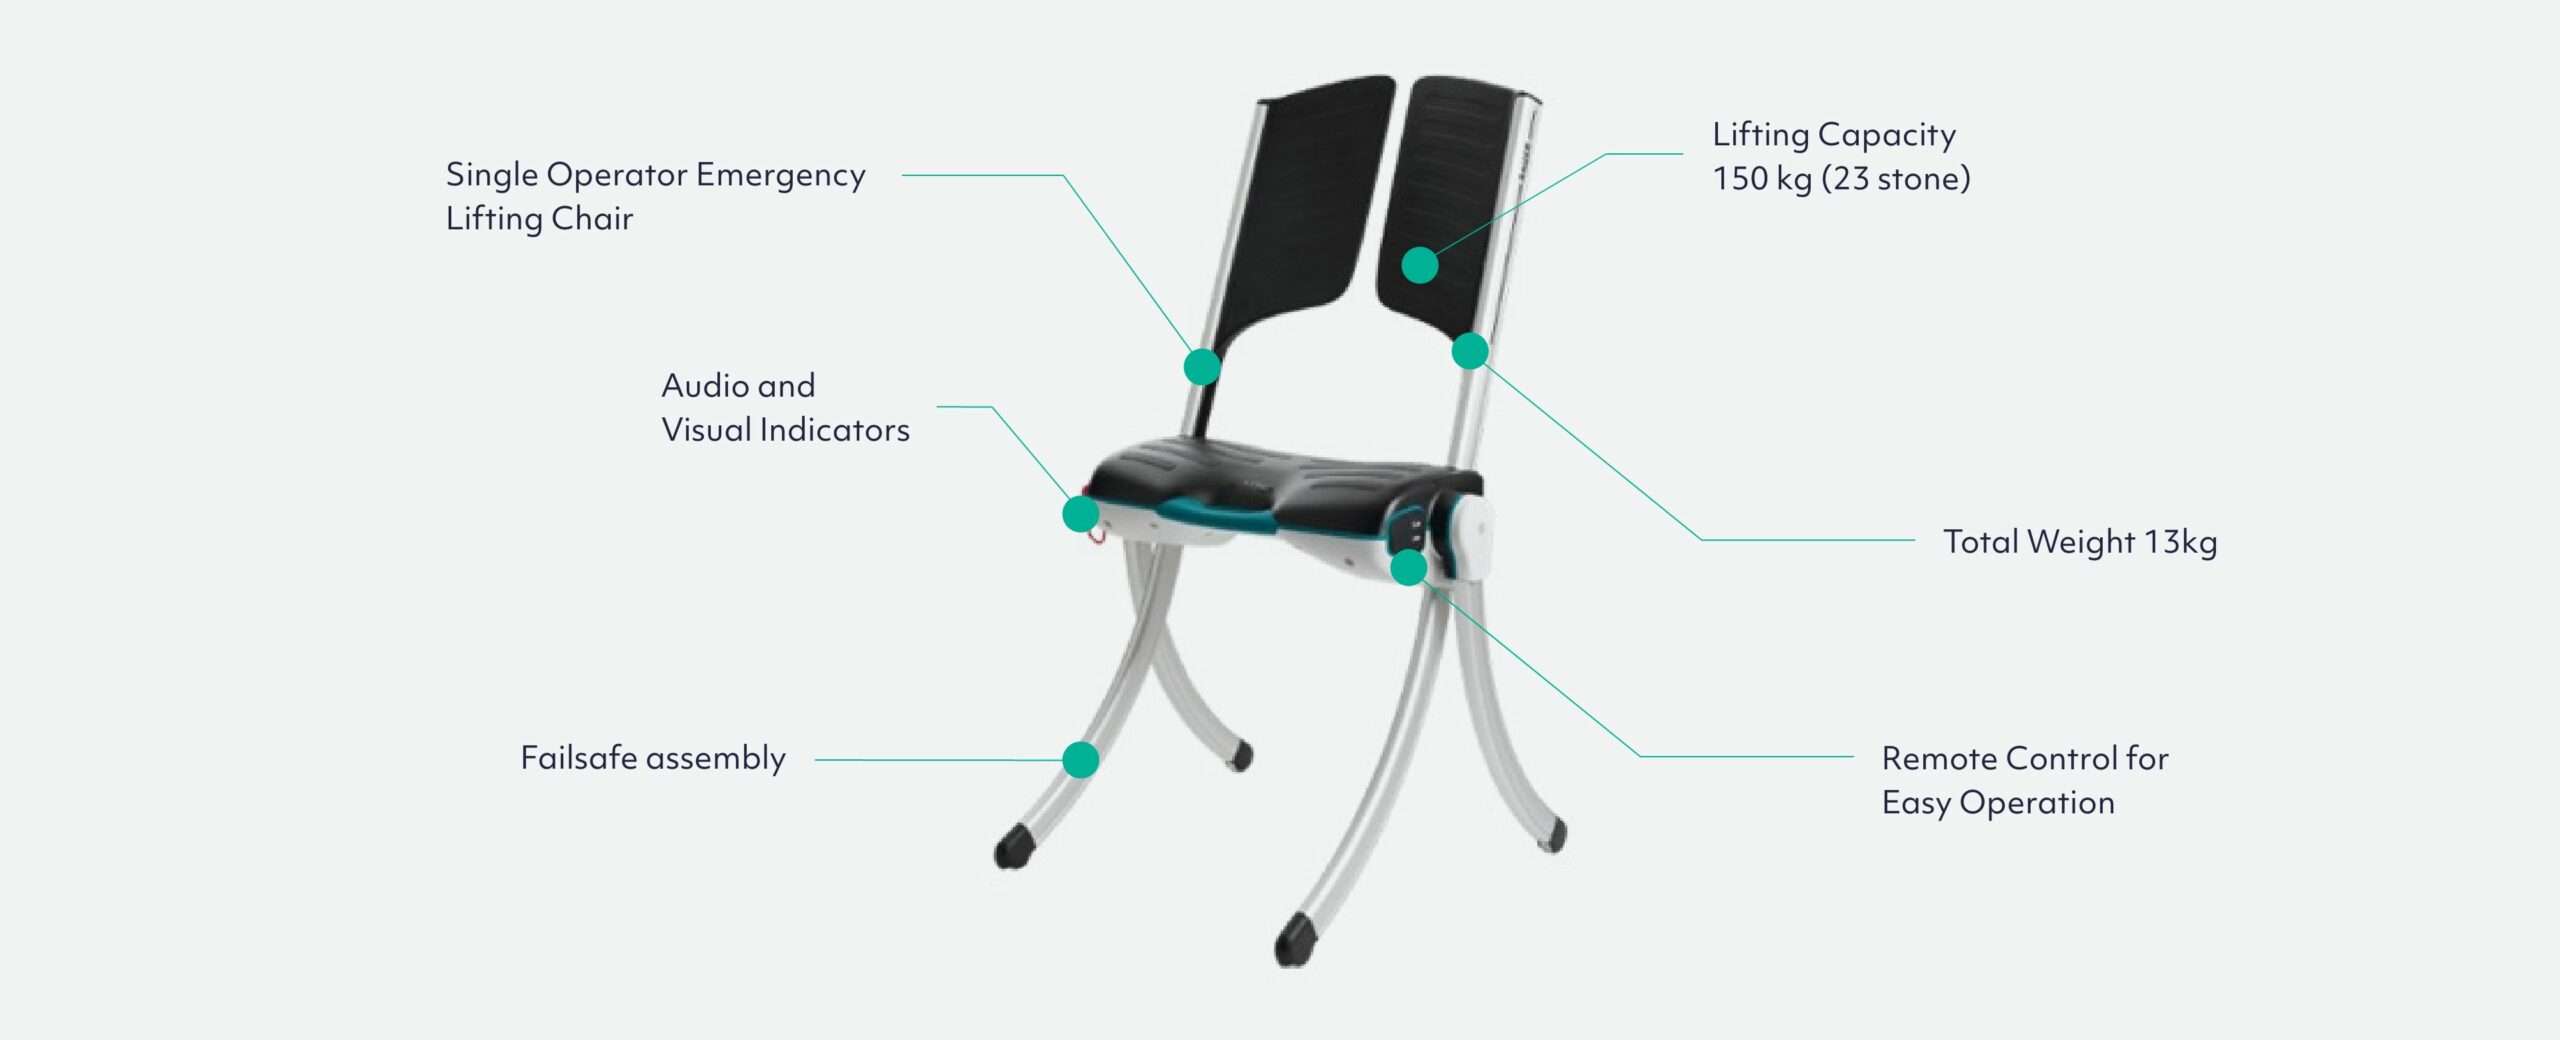 Diagram of the Raizer 2 emergency lifting chair with benefits labelled.